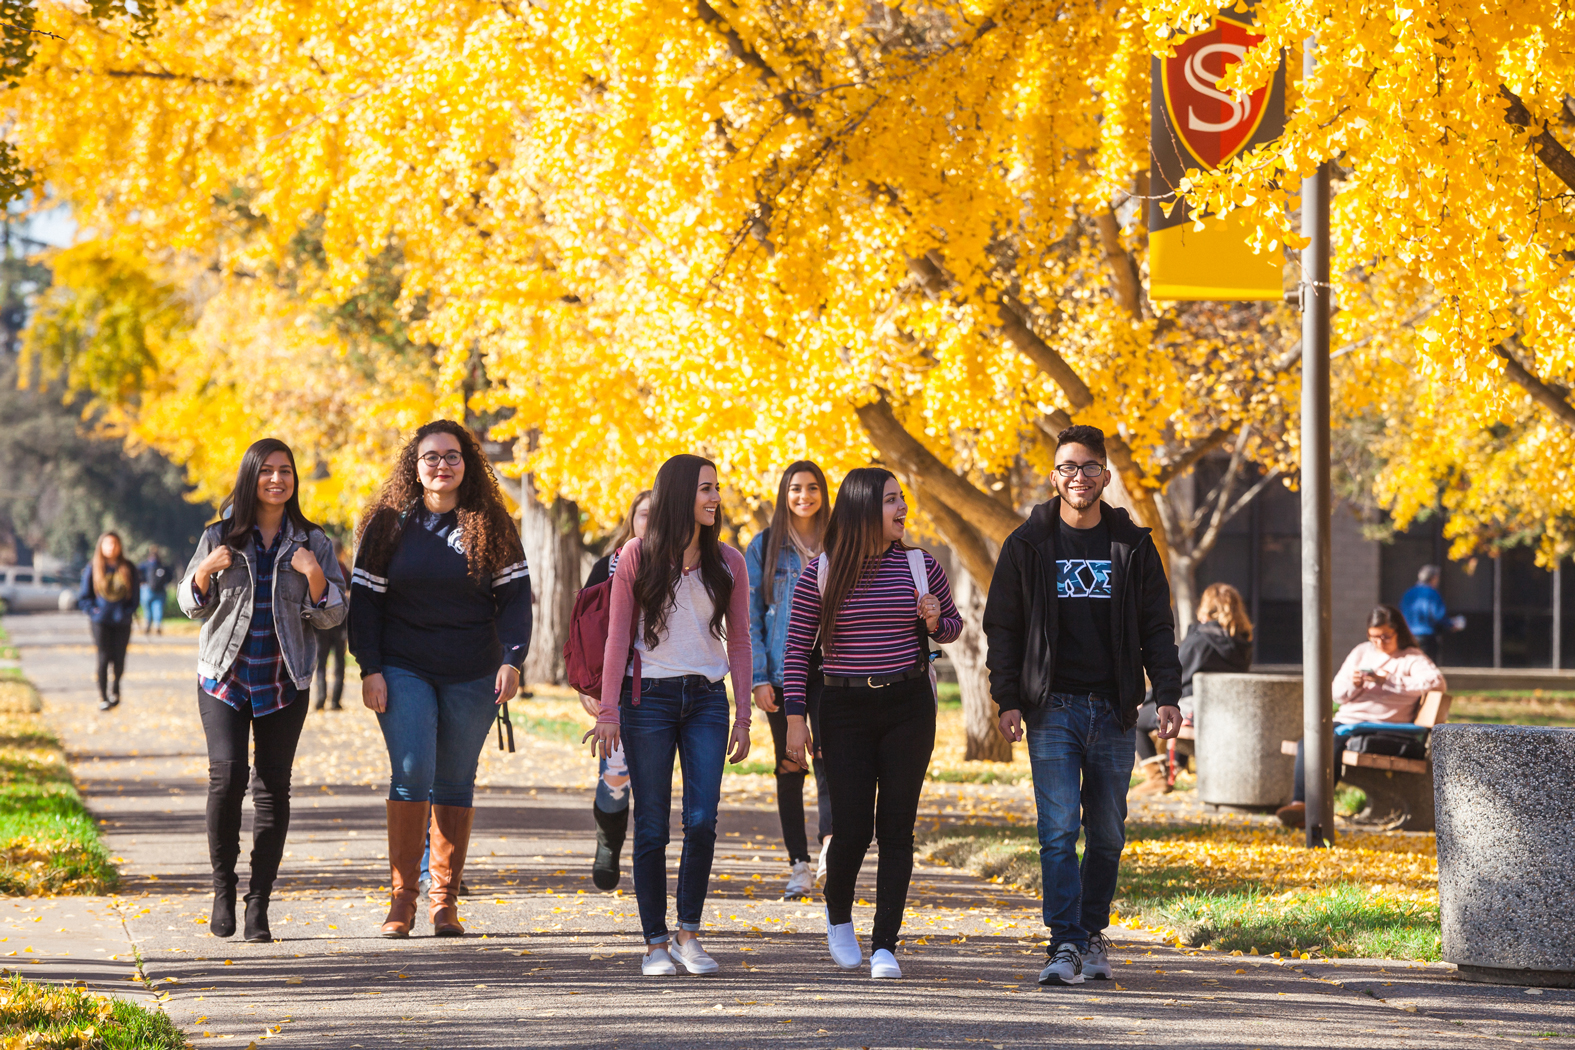 Students at the California State University-Stanislaus campus